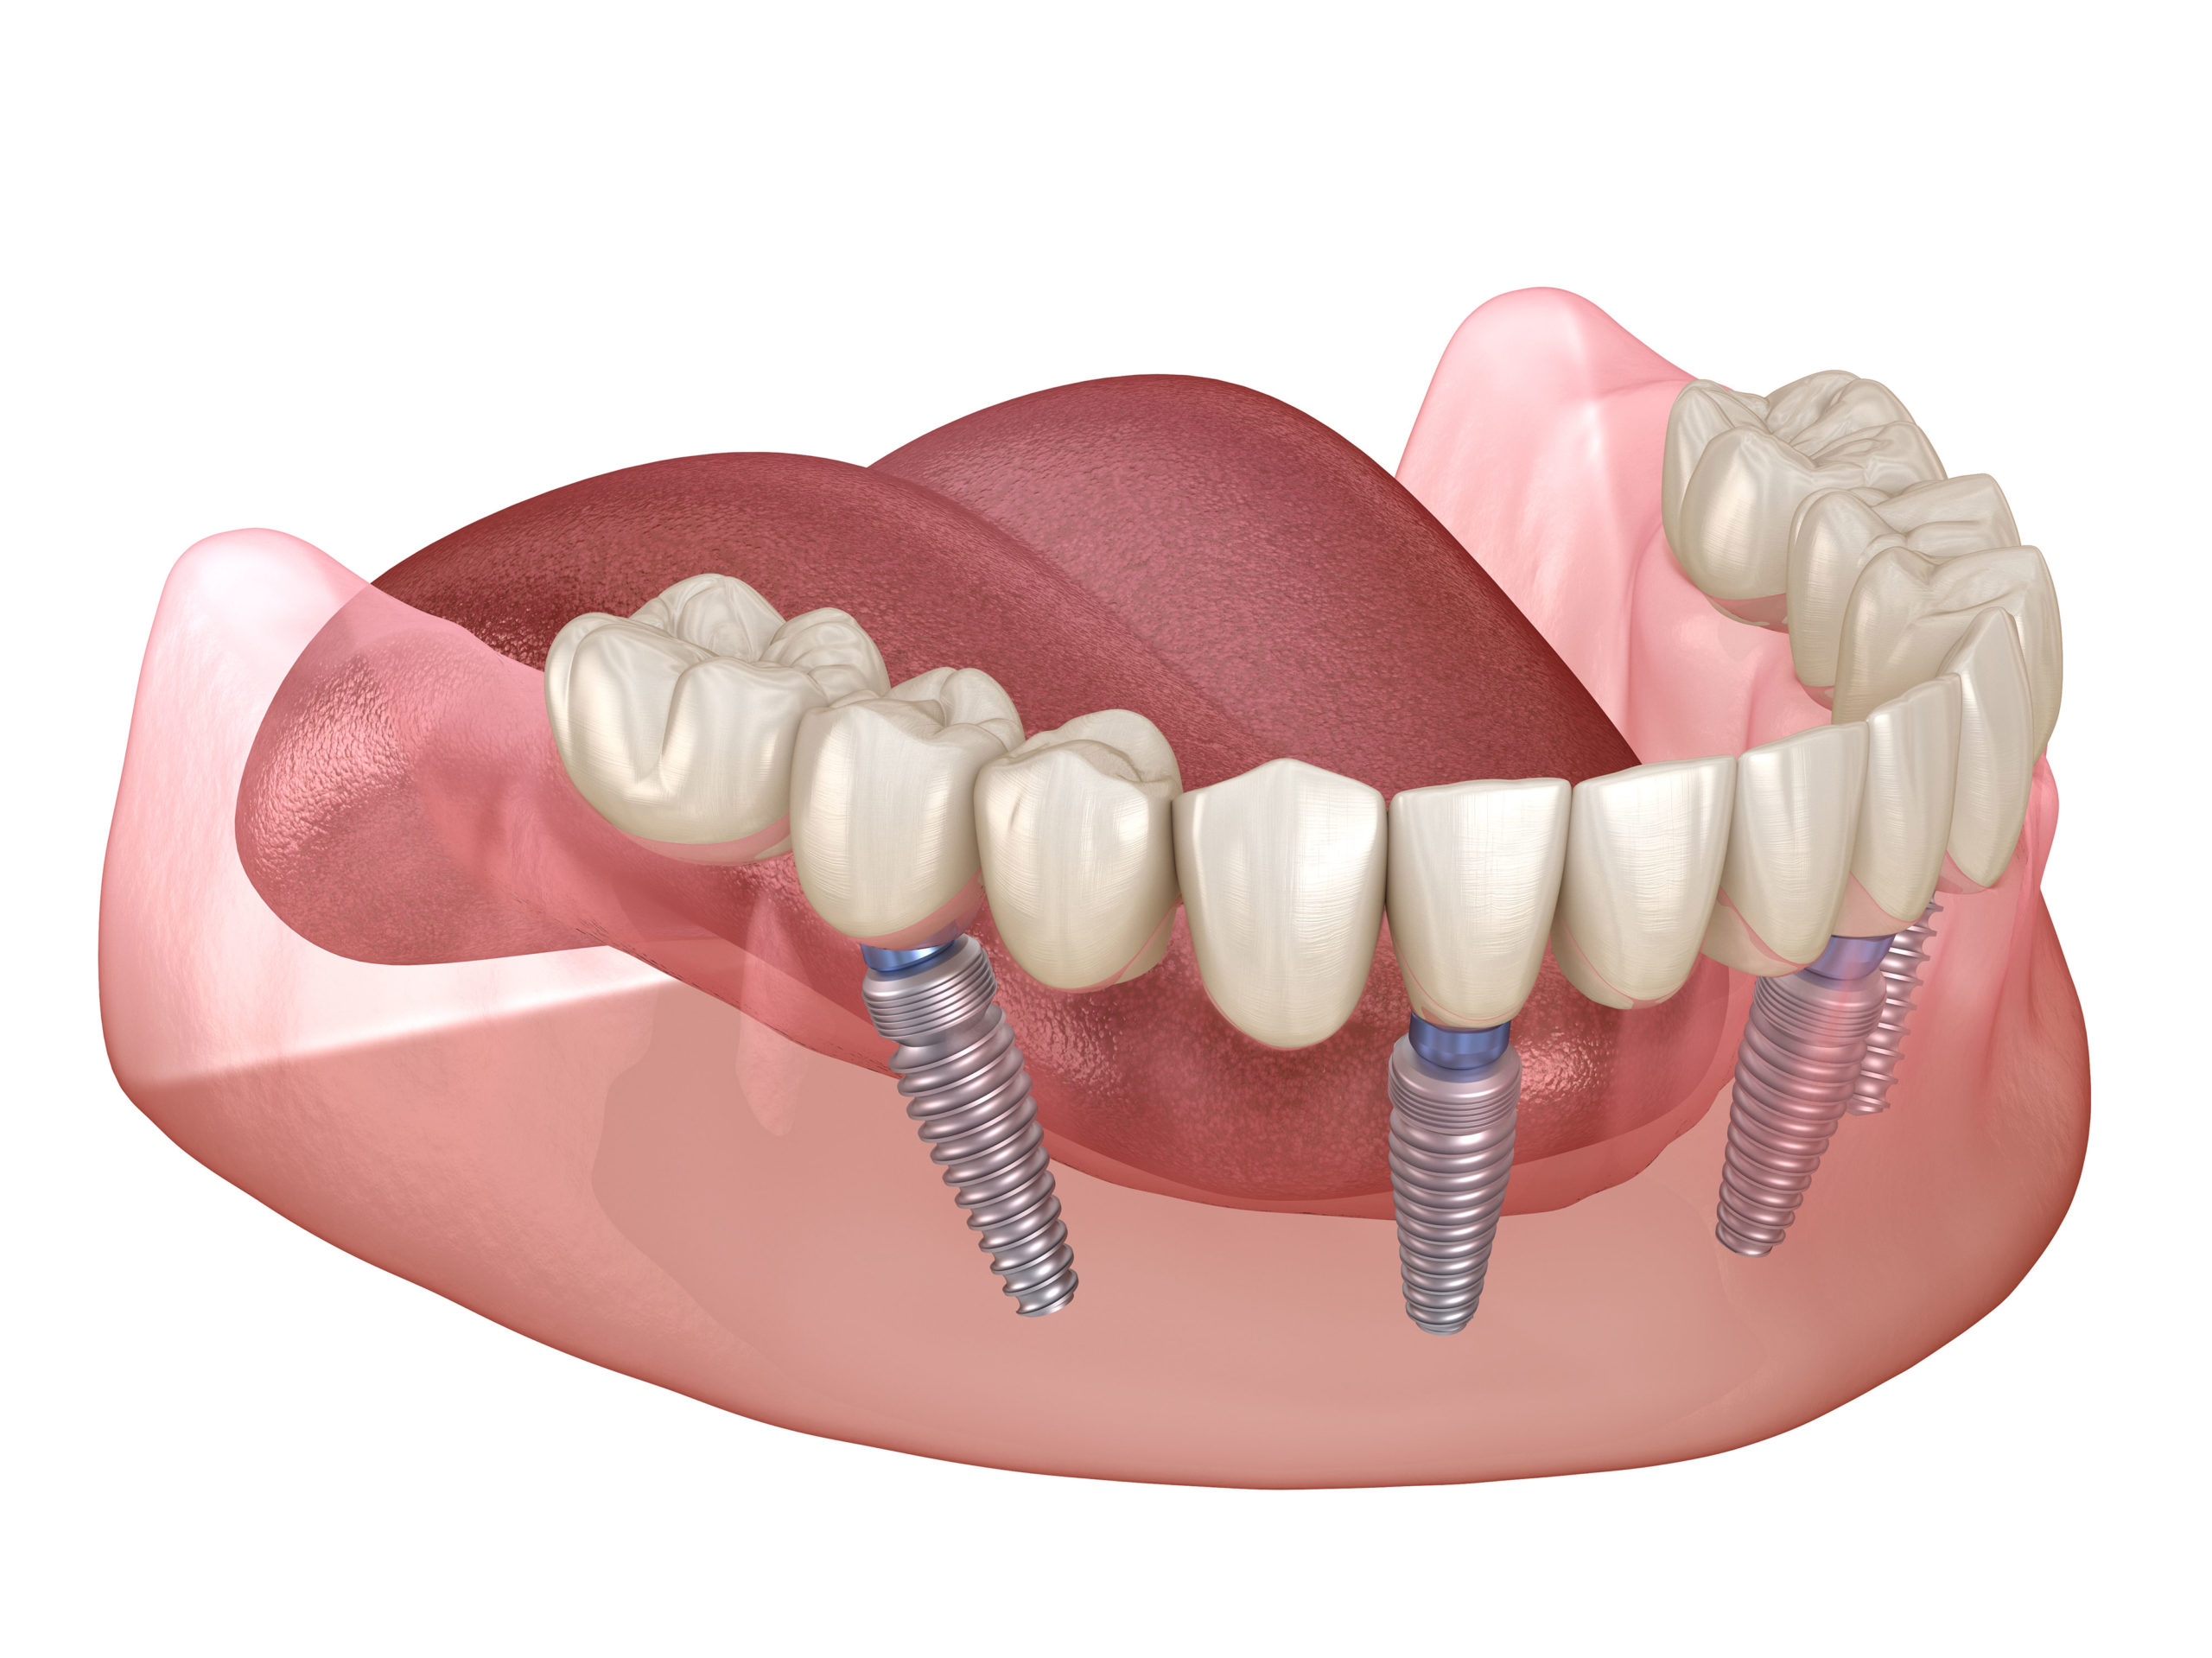 full-mouth-dental-implants-cost